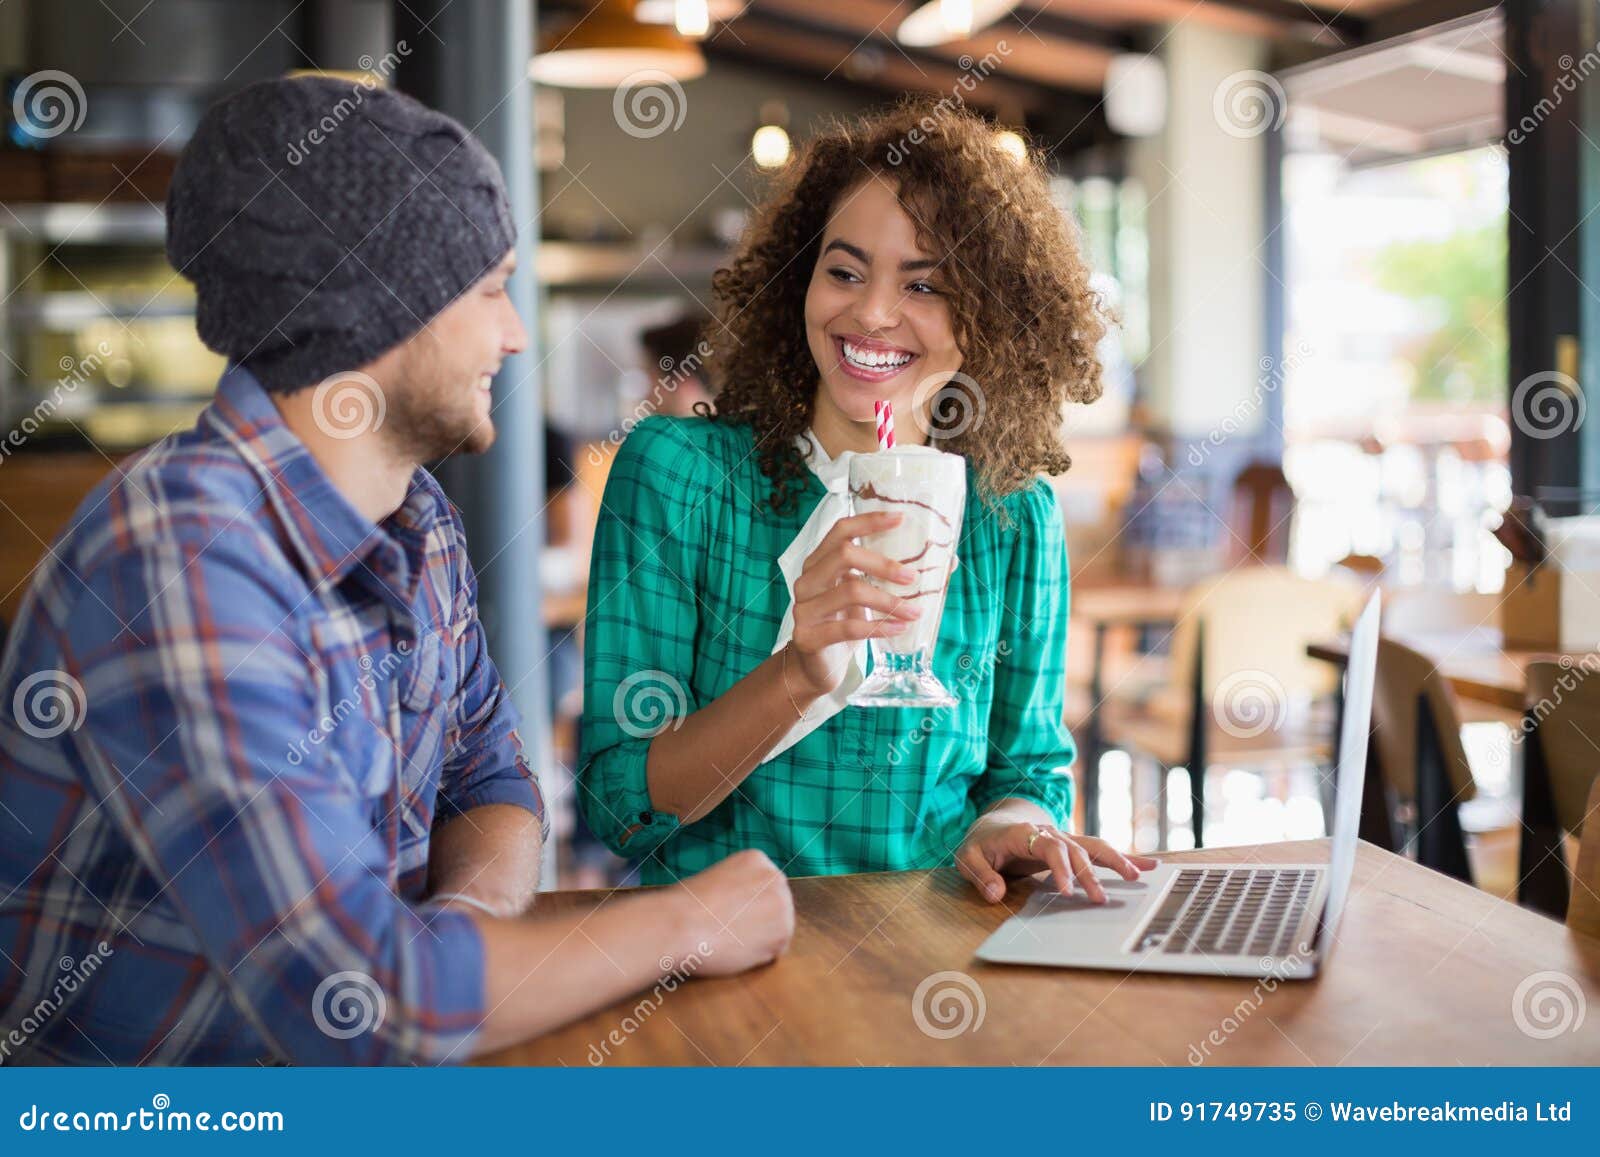 Smiling Woman Having Smoothie while Looking at Male Friend Sitting ...